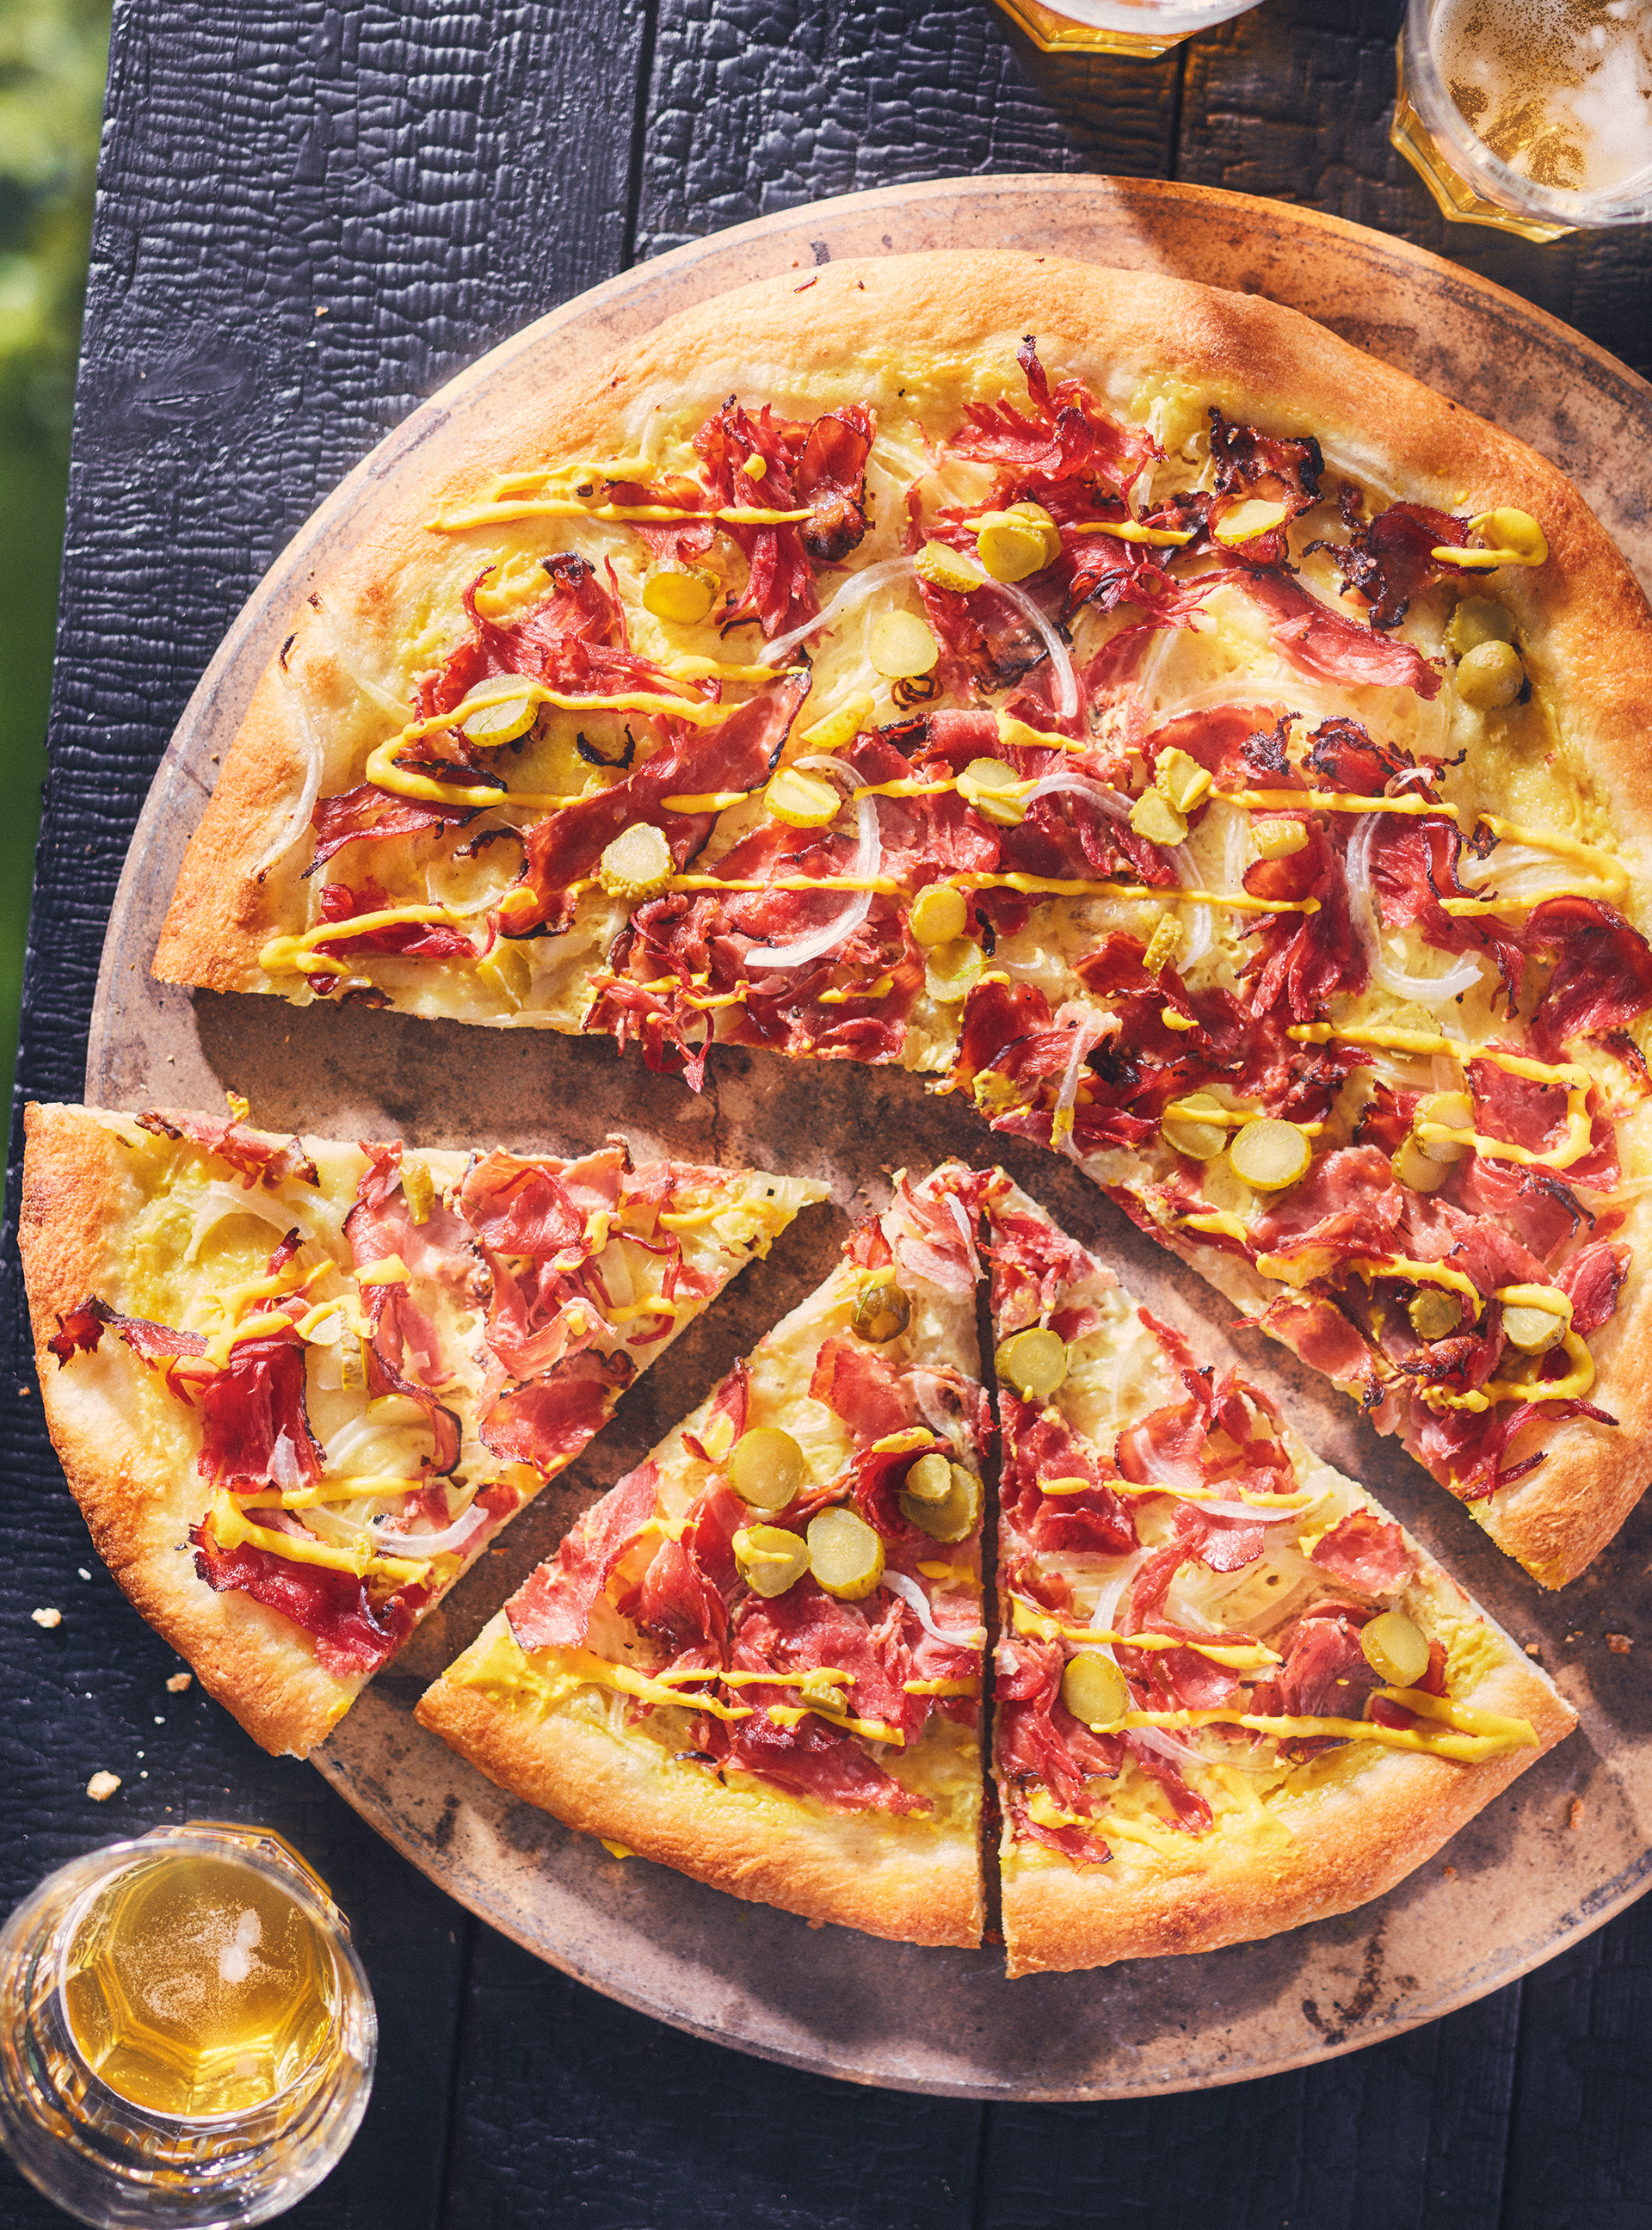 Pizza au smoked meat sur le barbecue